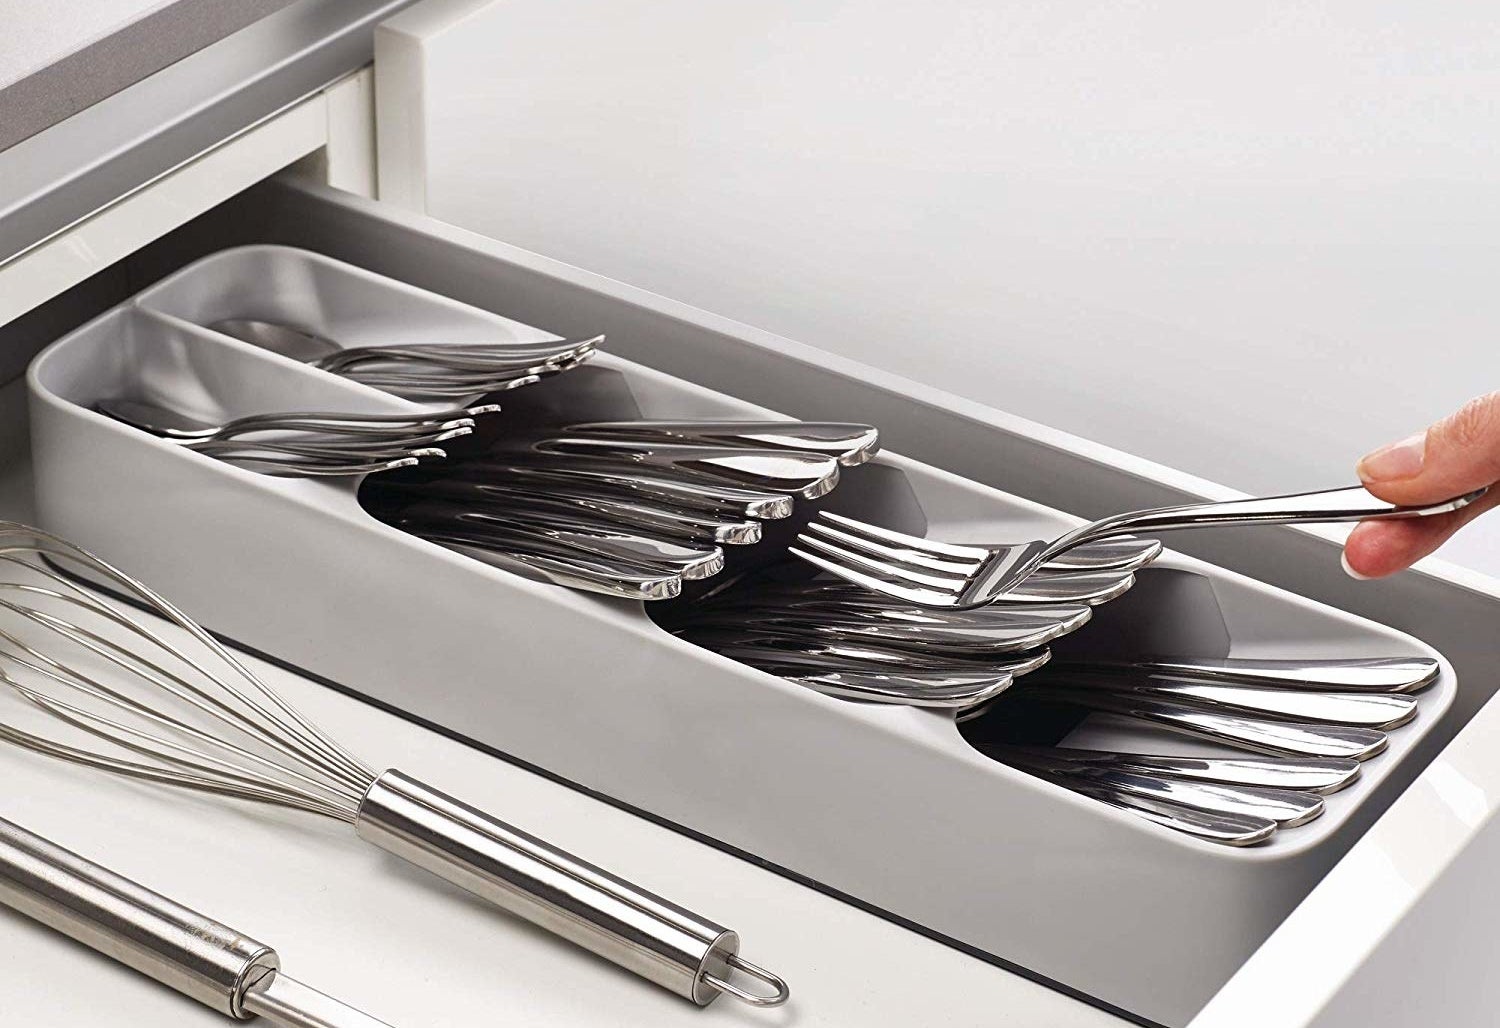 person putting a fork into the cutlery organizer